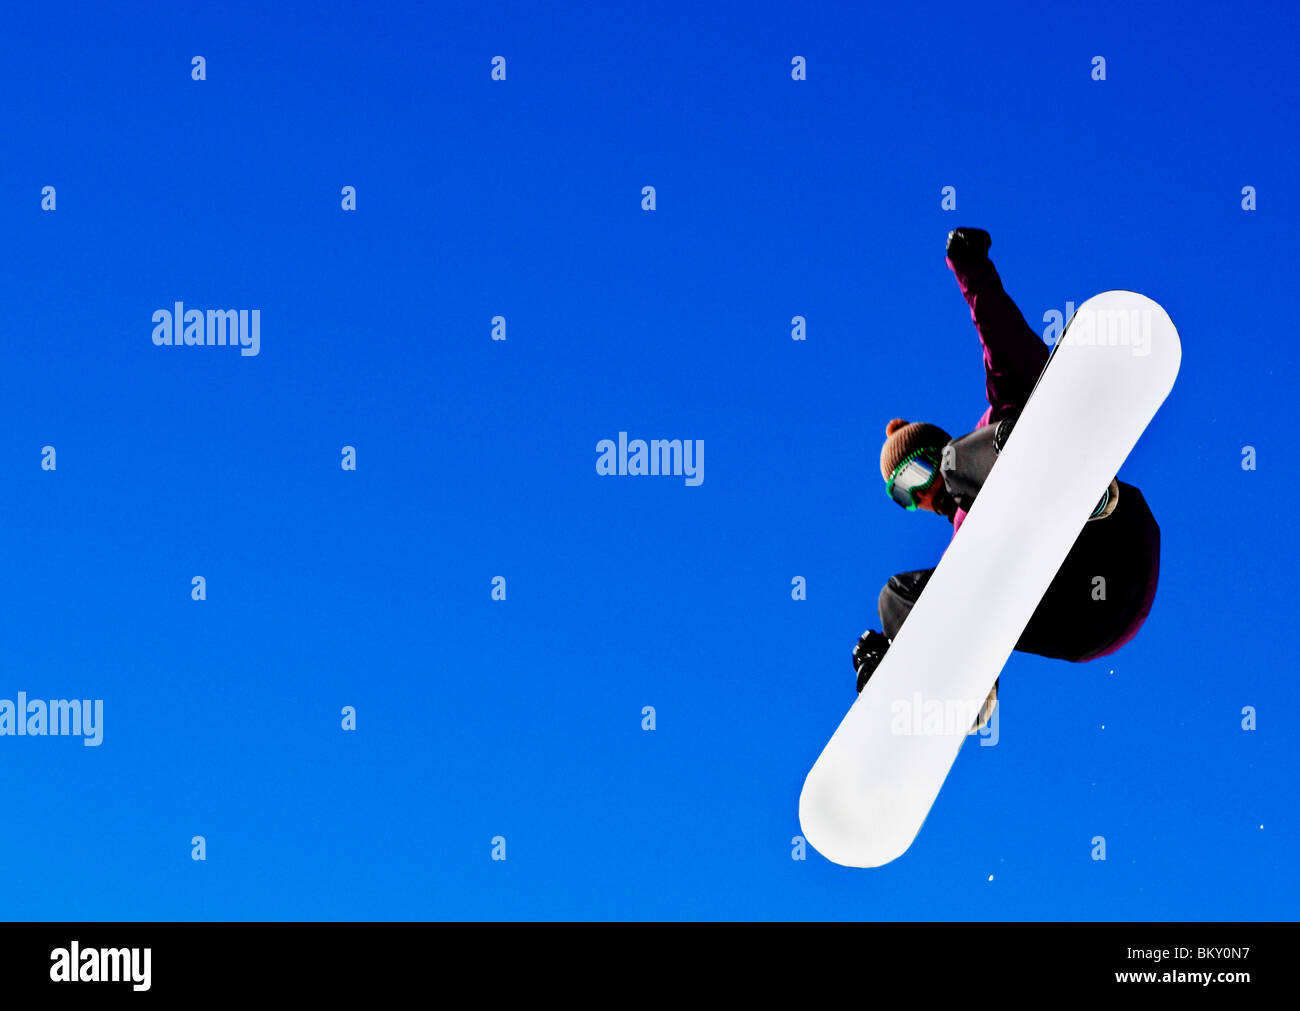 Man in midair jumping while snowboarding Stock Photo